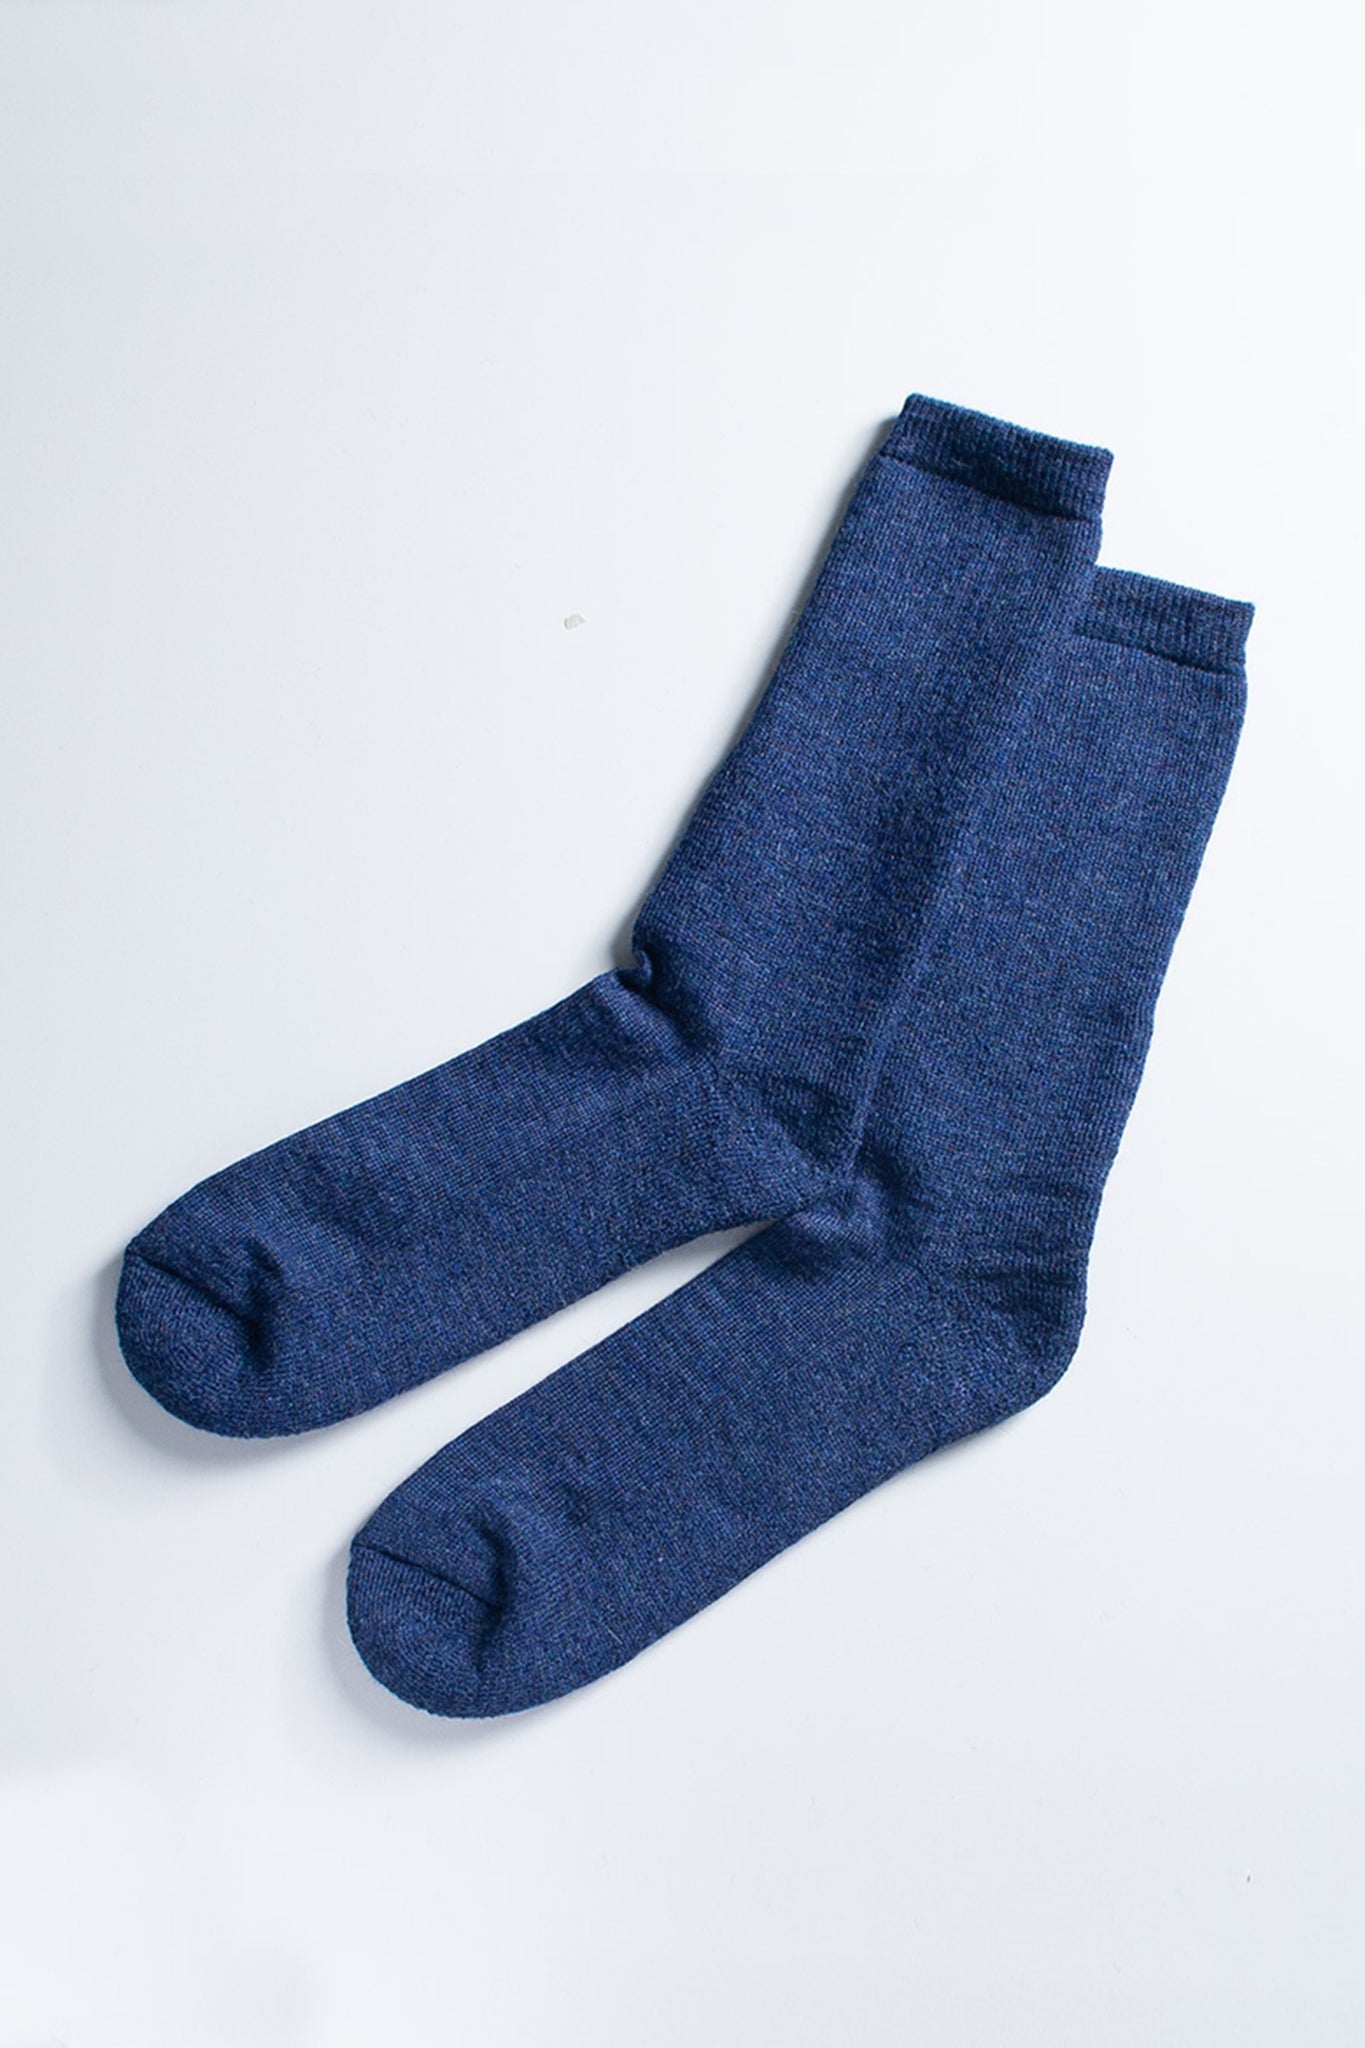 THE INOUE BROTHERS..."MOUNTAIN SOCKS / BLUE"